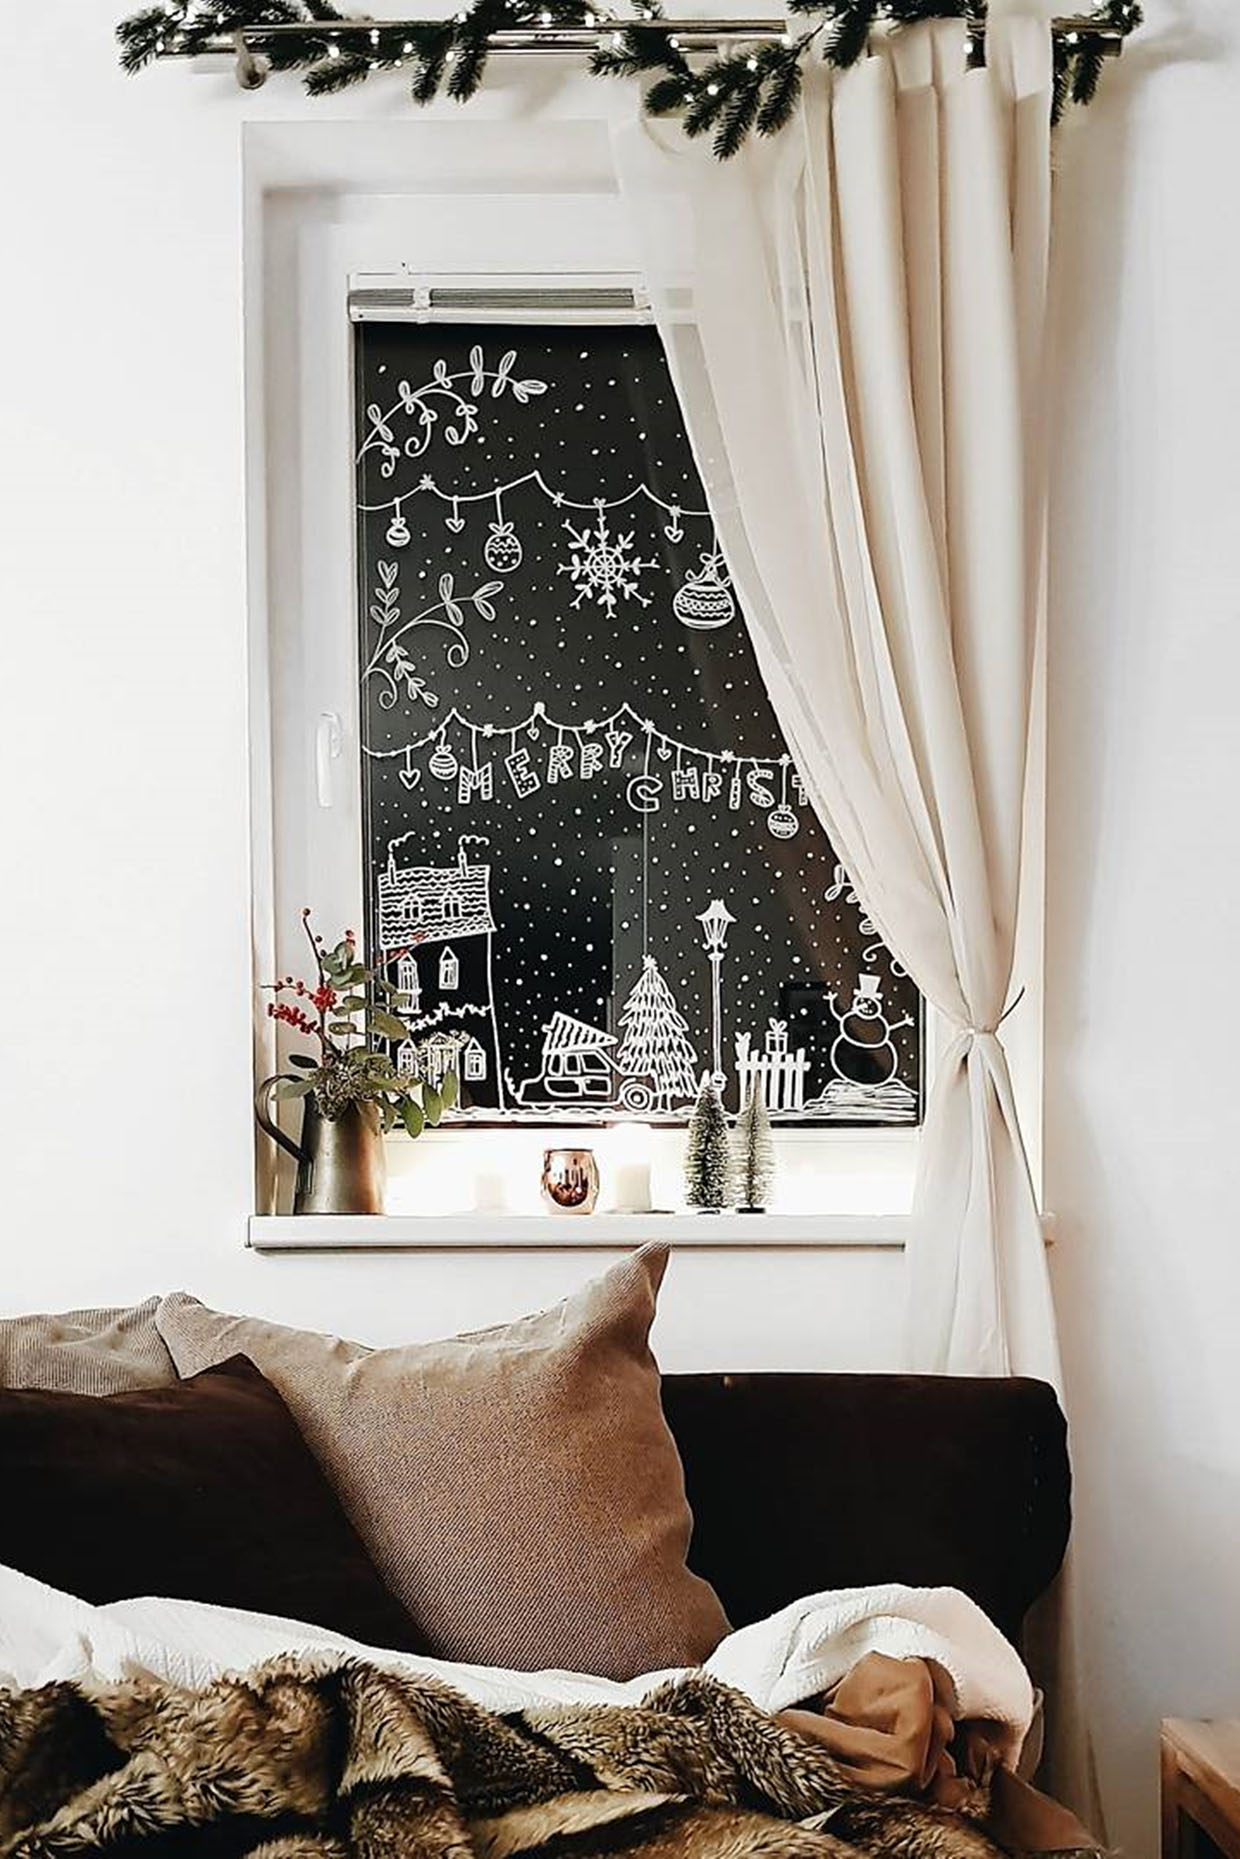 How to use window paint markers to create spectacular festive art - Gathered